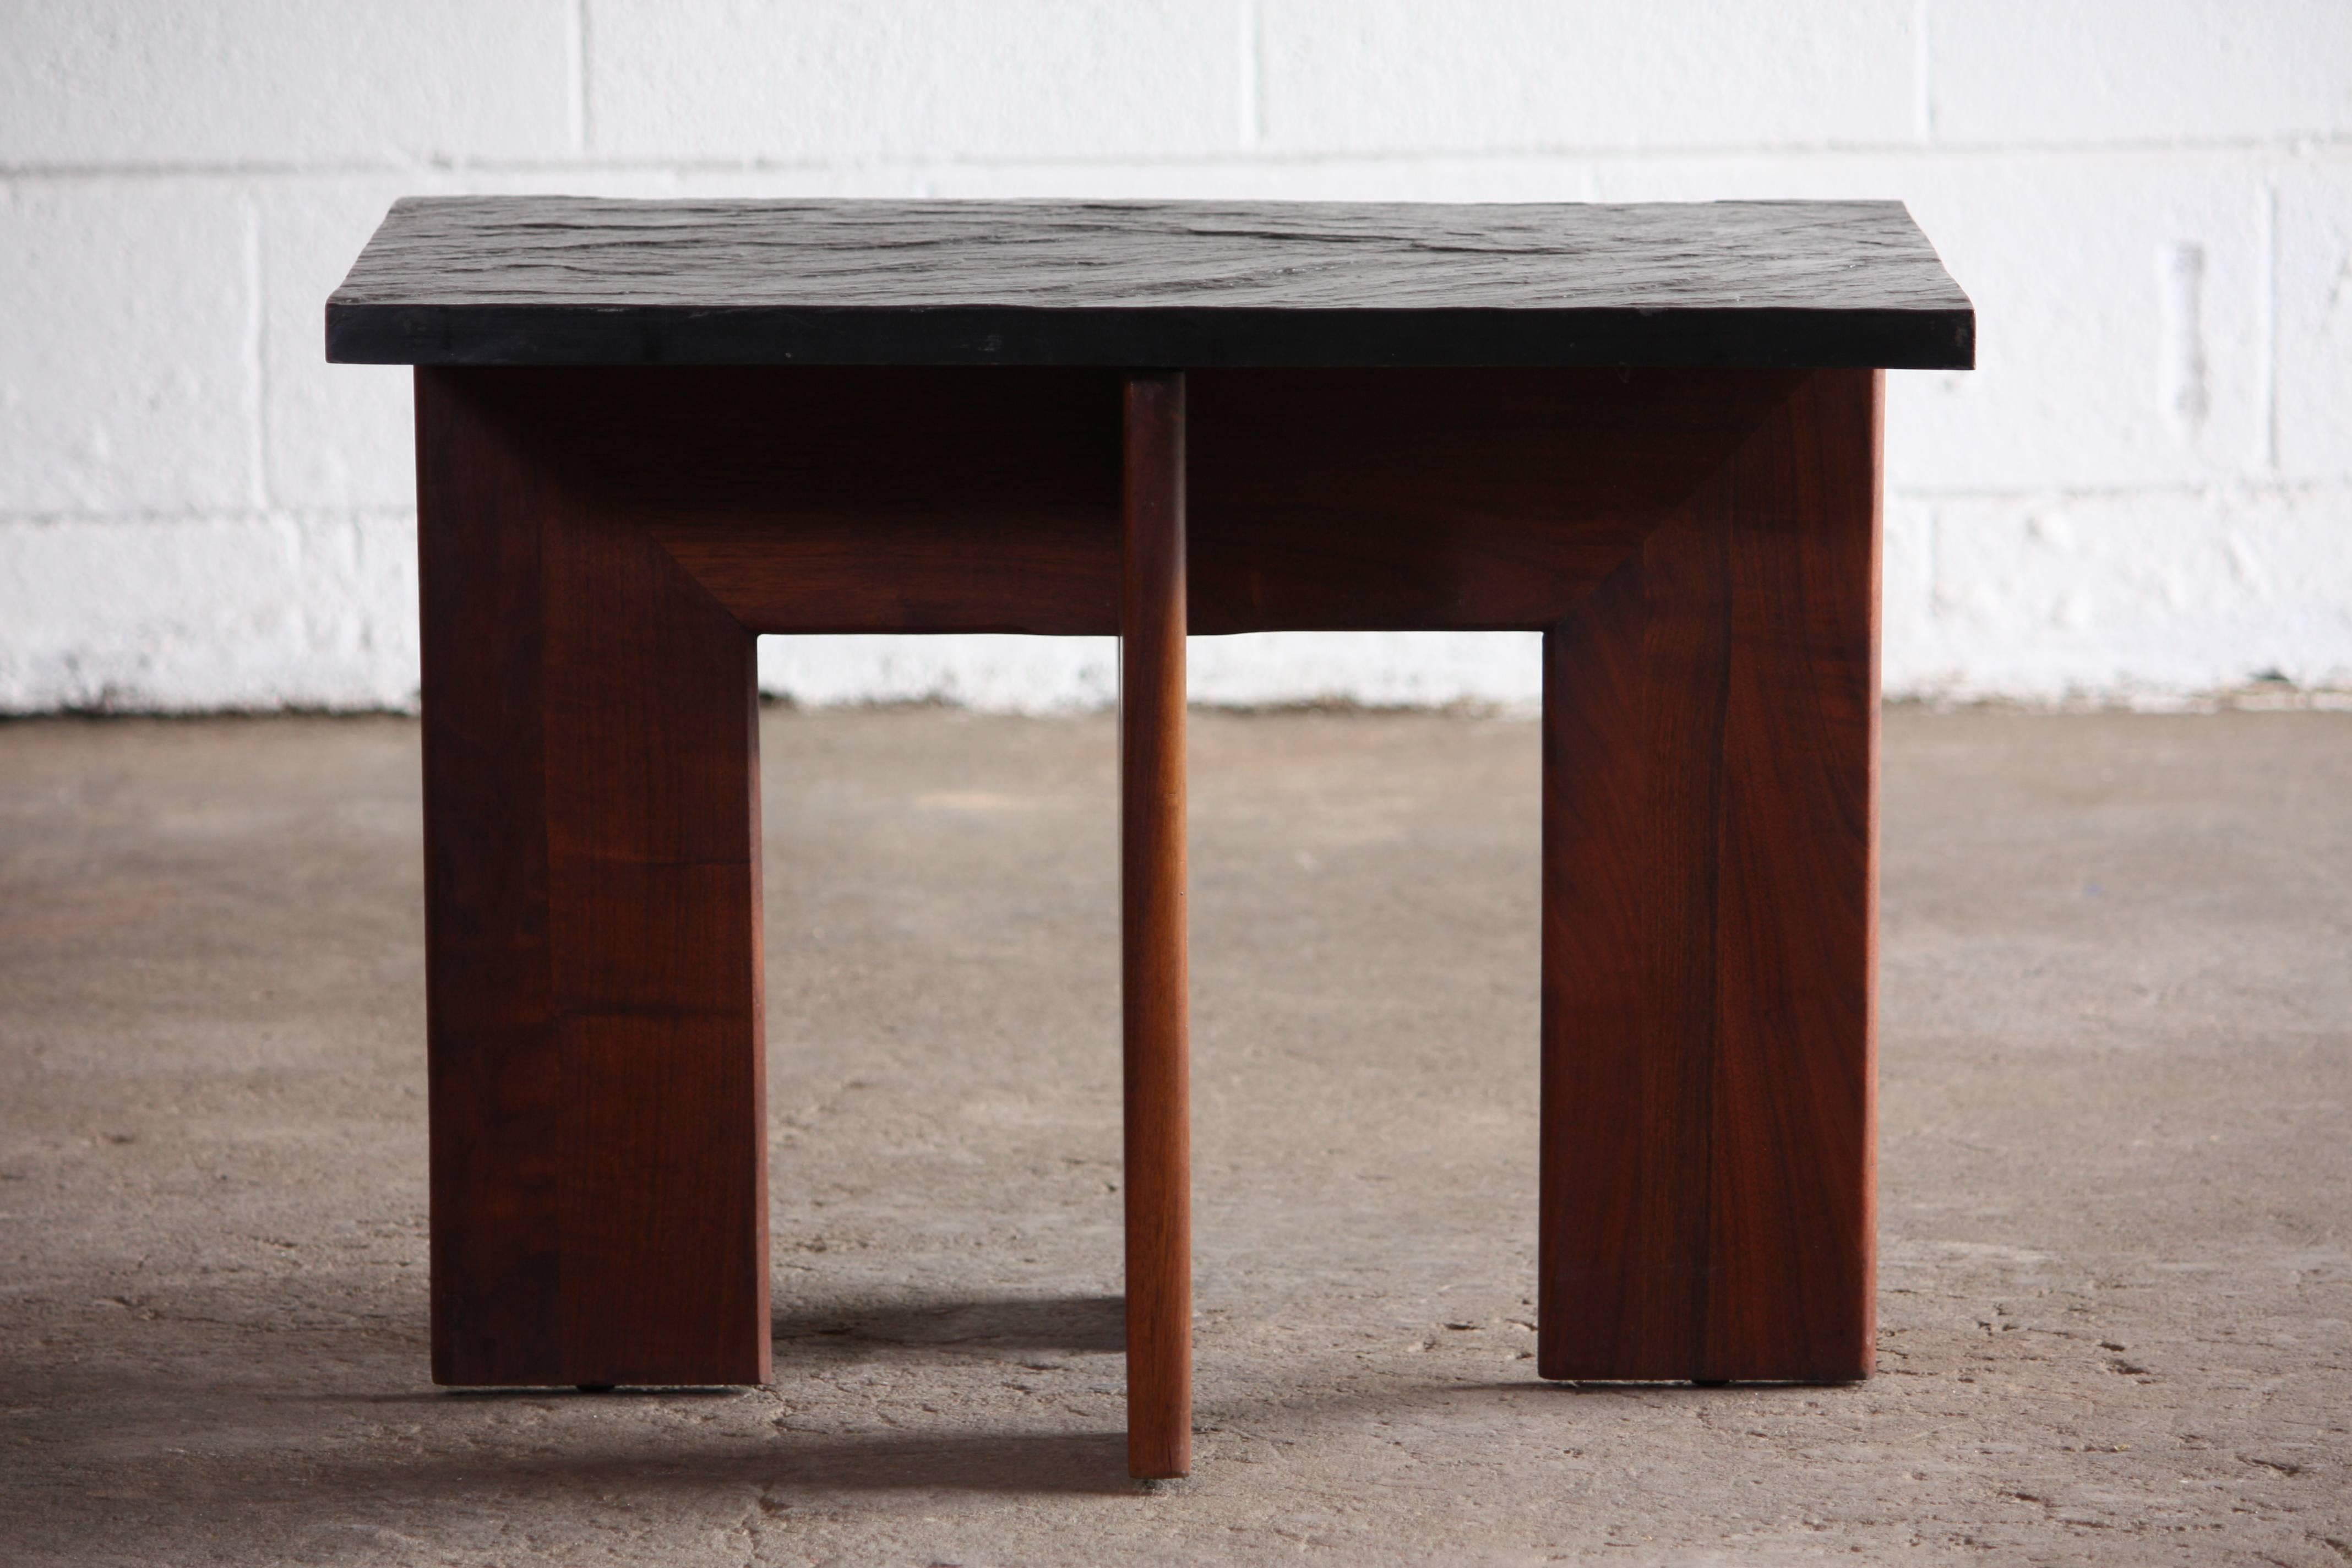 Unique slate top with walnut wood base side table or smaller cocktail table designed by Adrian Pearsall.